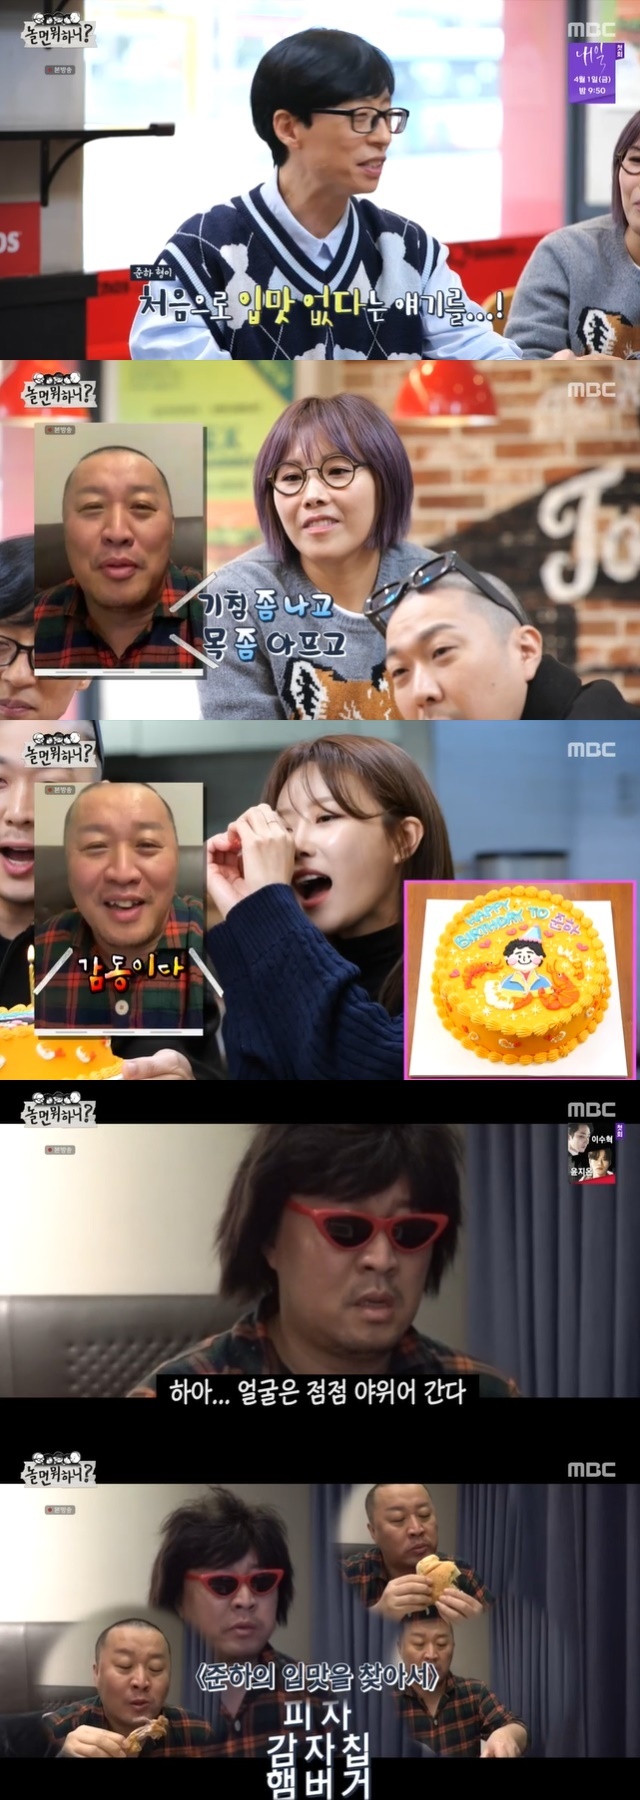 The recent situation of Jeong Jun-ha, who was confirmed by Corona, was revealed.In the 130th MBC entertainment Hangout with Yo (hereinafter referred to as What to Play) broadcast on March 26, a strange scene called Jeong Jun-ha birthday party without Jeong Jun-ha was unfolded due to the Jeong Jun-ha who was absent from the recording due to the confirmation of Corona 19.Yoo Jae-Suk met with the rest of the members after two weeks of minus Jeong Jun-ha, saying, Its been a long time since MBTI special feature. Mina (Shin Bong-sun) has been confirmed (Corona 19) since the special feature.But whats up? The day before Minas release, Jeong Jun-ha was confirmed. So hes in isolation.Just in time, Jeong Jun-has birthday is the day after the recording day.Yoo Jae-Suk said, I first told you that I did not have a appetite. He told the tragic state of Jeong Jun-ha, and Haha and the Americas are really sick, I will lose weight.My brother, he said, saddened.Since then, the members have had video call time with Jin-ha.Jin-ha said, I am a little bit sick and I am a little sick. Jeong Jun-ha said, I am coughing and my neck is hurting.The real voice was a snort.What to Play members gave a Lantern birthday party for the birthday of Jeong Jun-ha, who was pleased with this but was saddened by everyone is bright.On the other hand, the members of Noll who achieved their purpose by giving a birthday party immediately called We are busy and made a loud voice.After that, Jeong Jun-has isolation of the third day of self-cam was revealed. Jeong Jun-ha said, My face is getting thinner, I do not feel taste, I just have no appetite.However, he laughed at the appearance of inhaling food such as dumplings, jjajangmyeon, potato soup, pizza, ramen, chicken, seaweed soup.In addition, Jin-ha had 17 kinds of food for two days in isolation, but the story that he could not find his appetite until the day before the release of the isolation was reported through the subtitles.